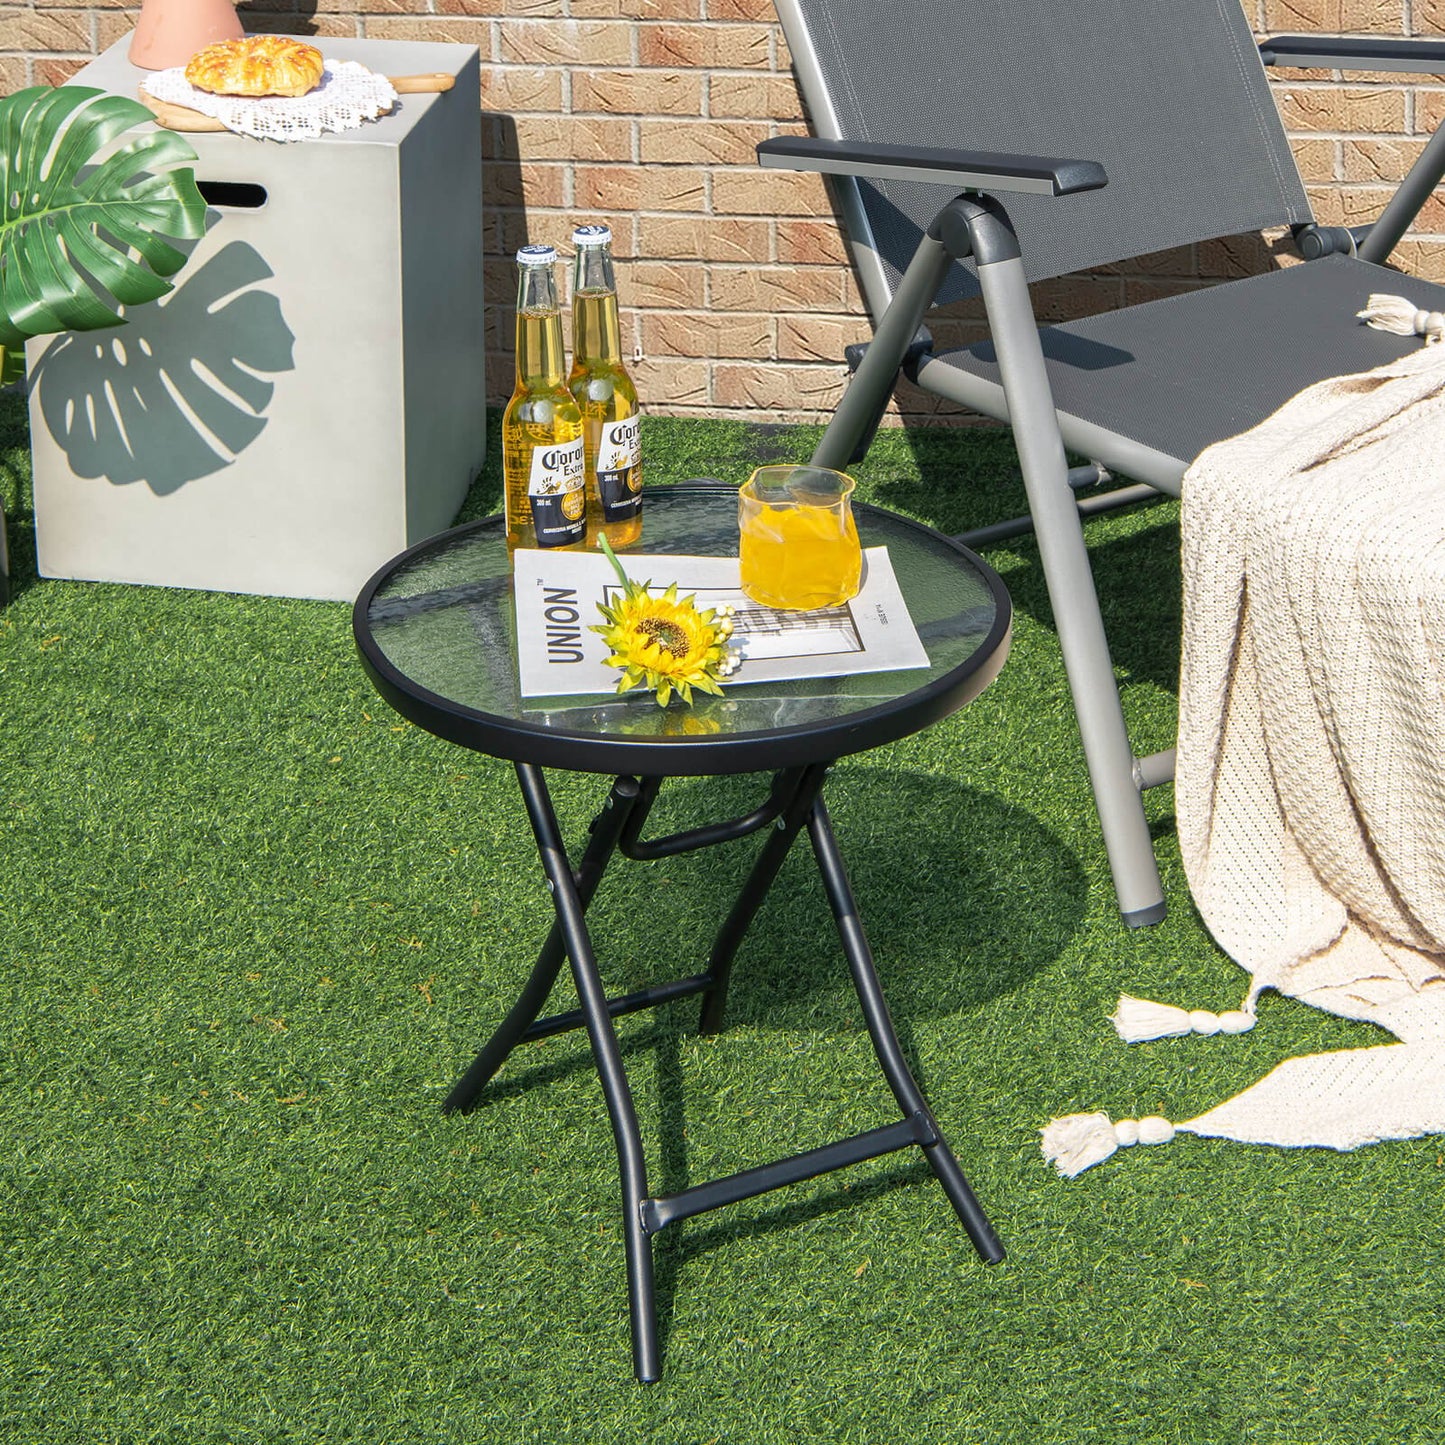 Patio Side Table with Tempered Glass Tabletop, Black - Gallery Canada